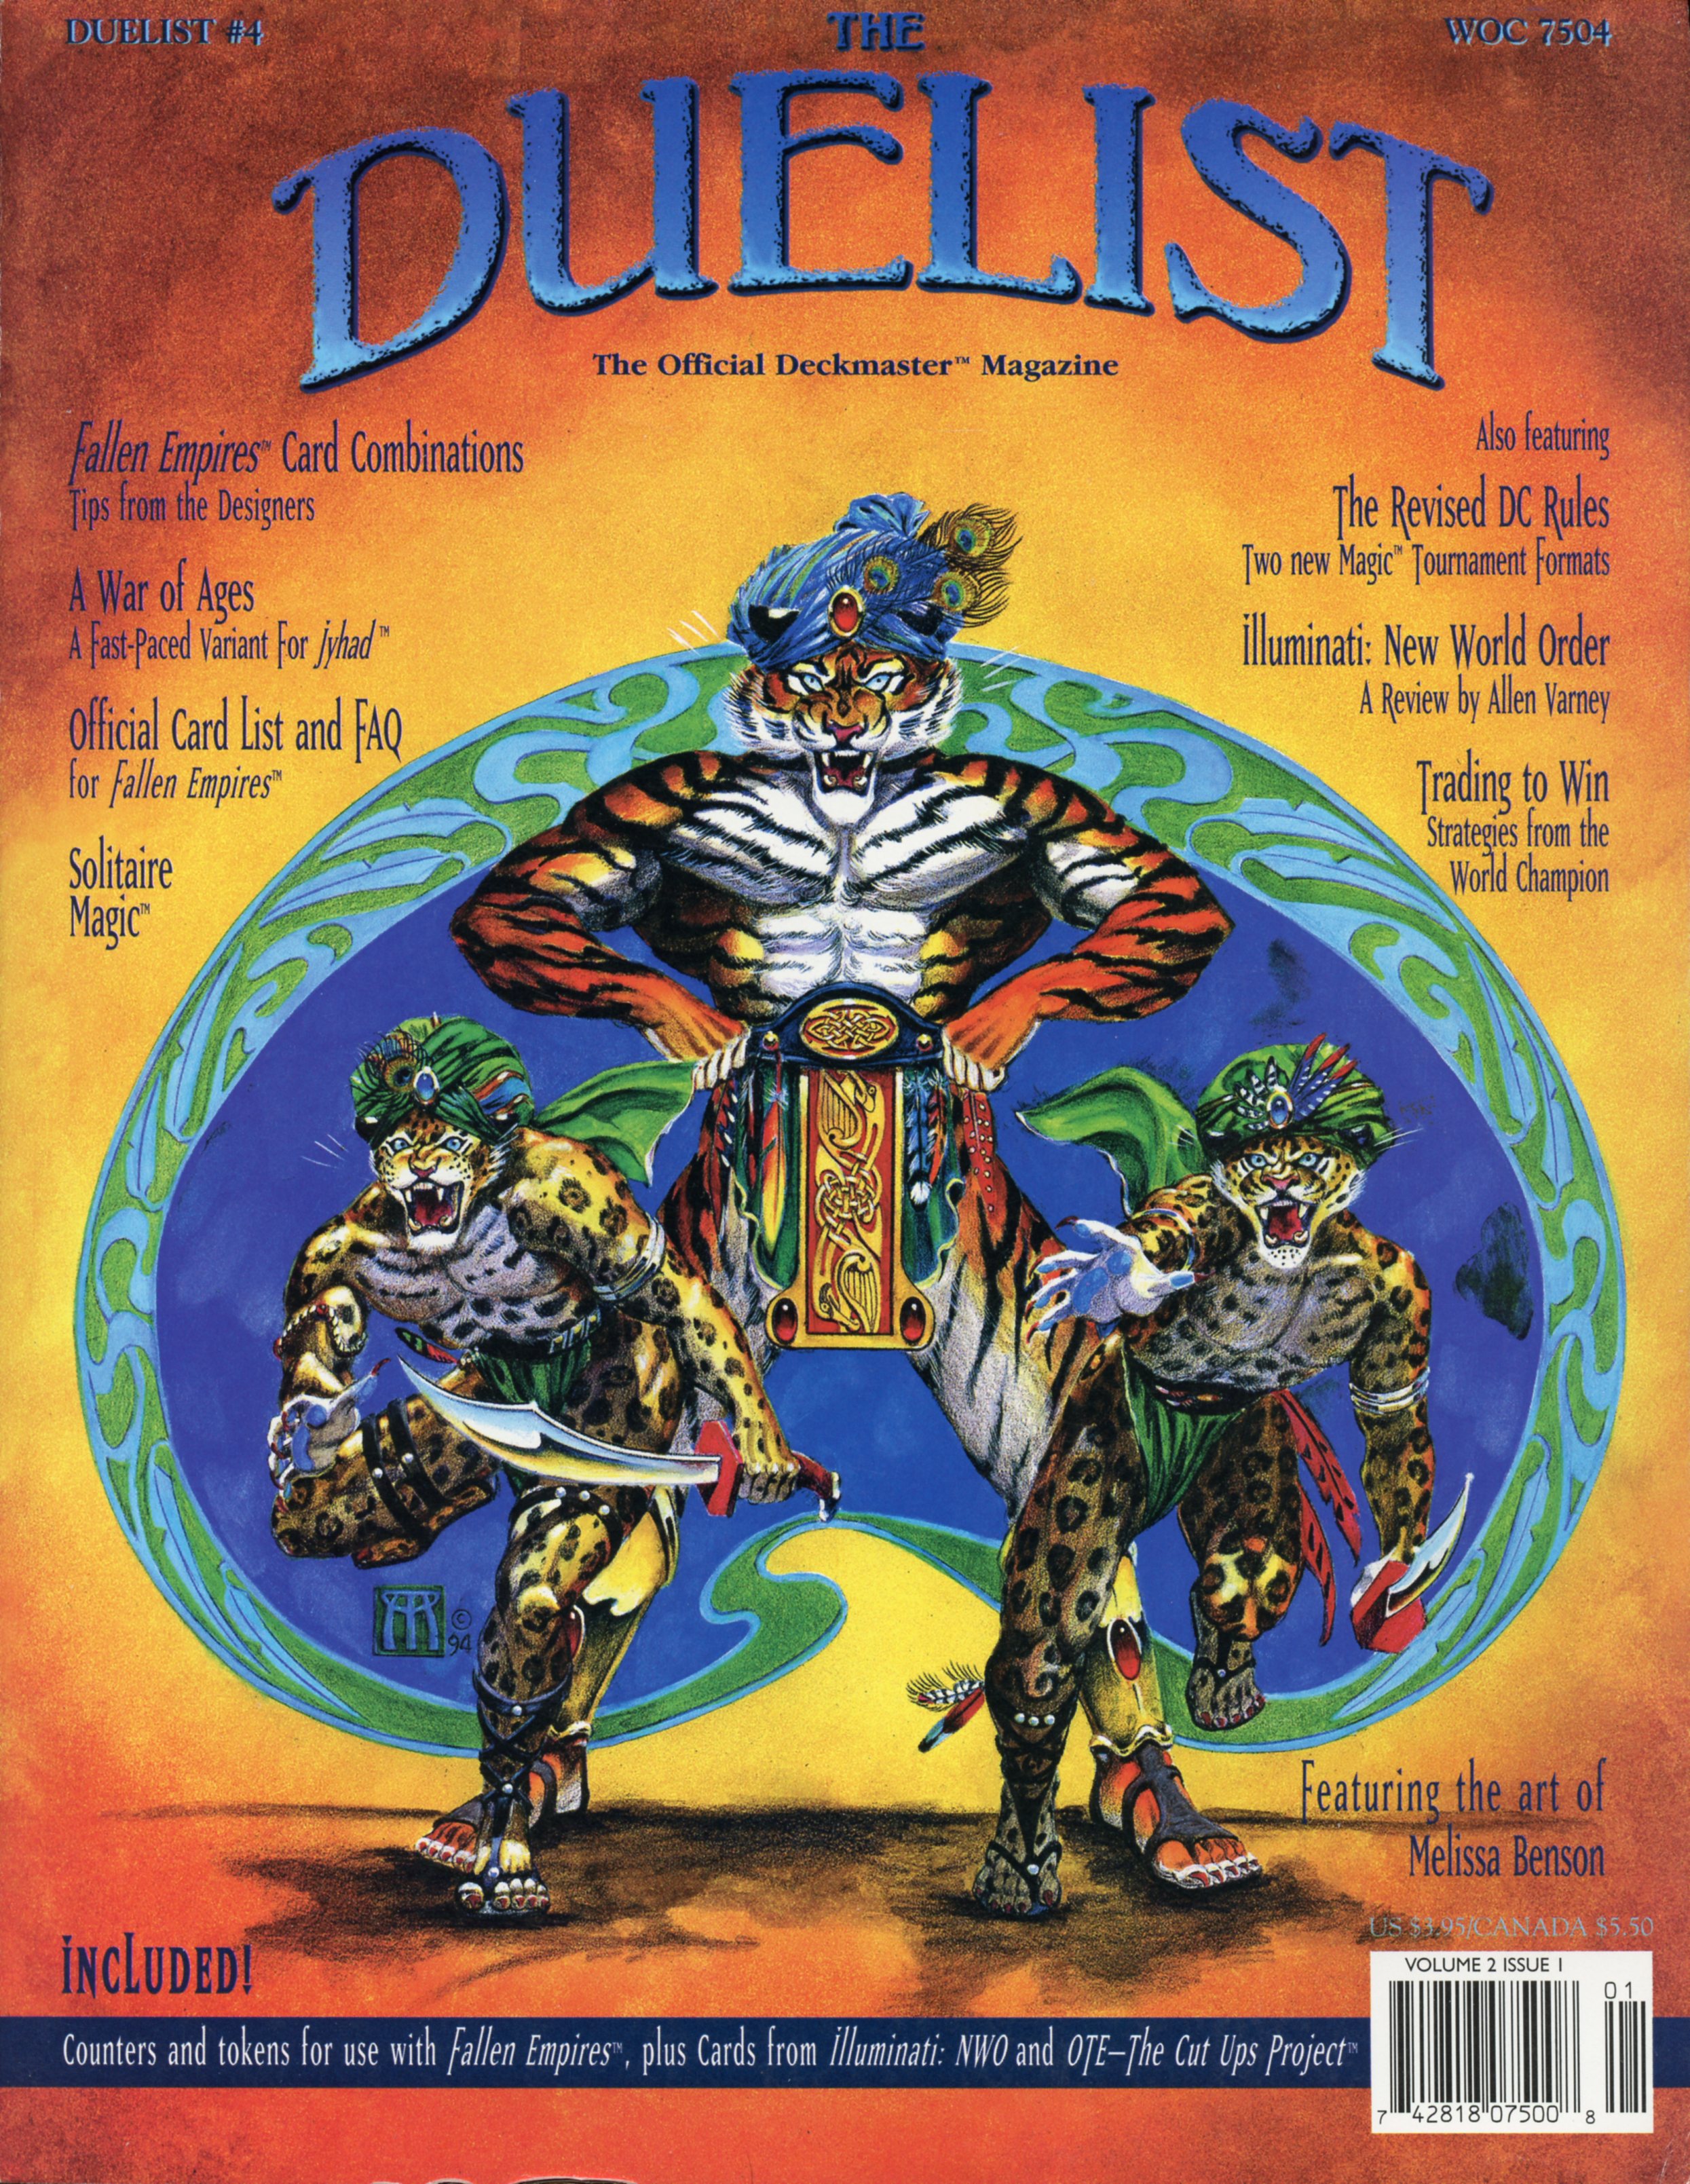 The Duelist #4, March 1995